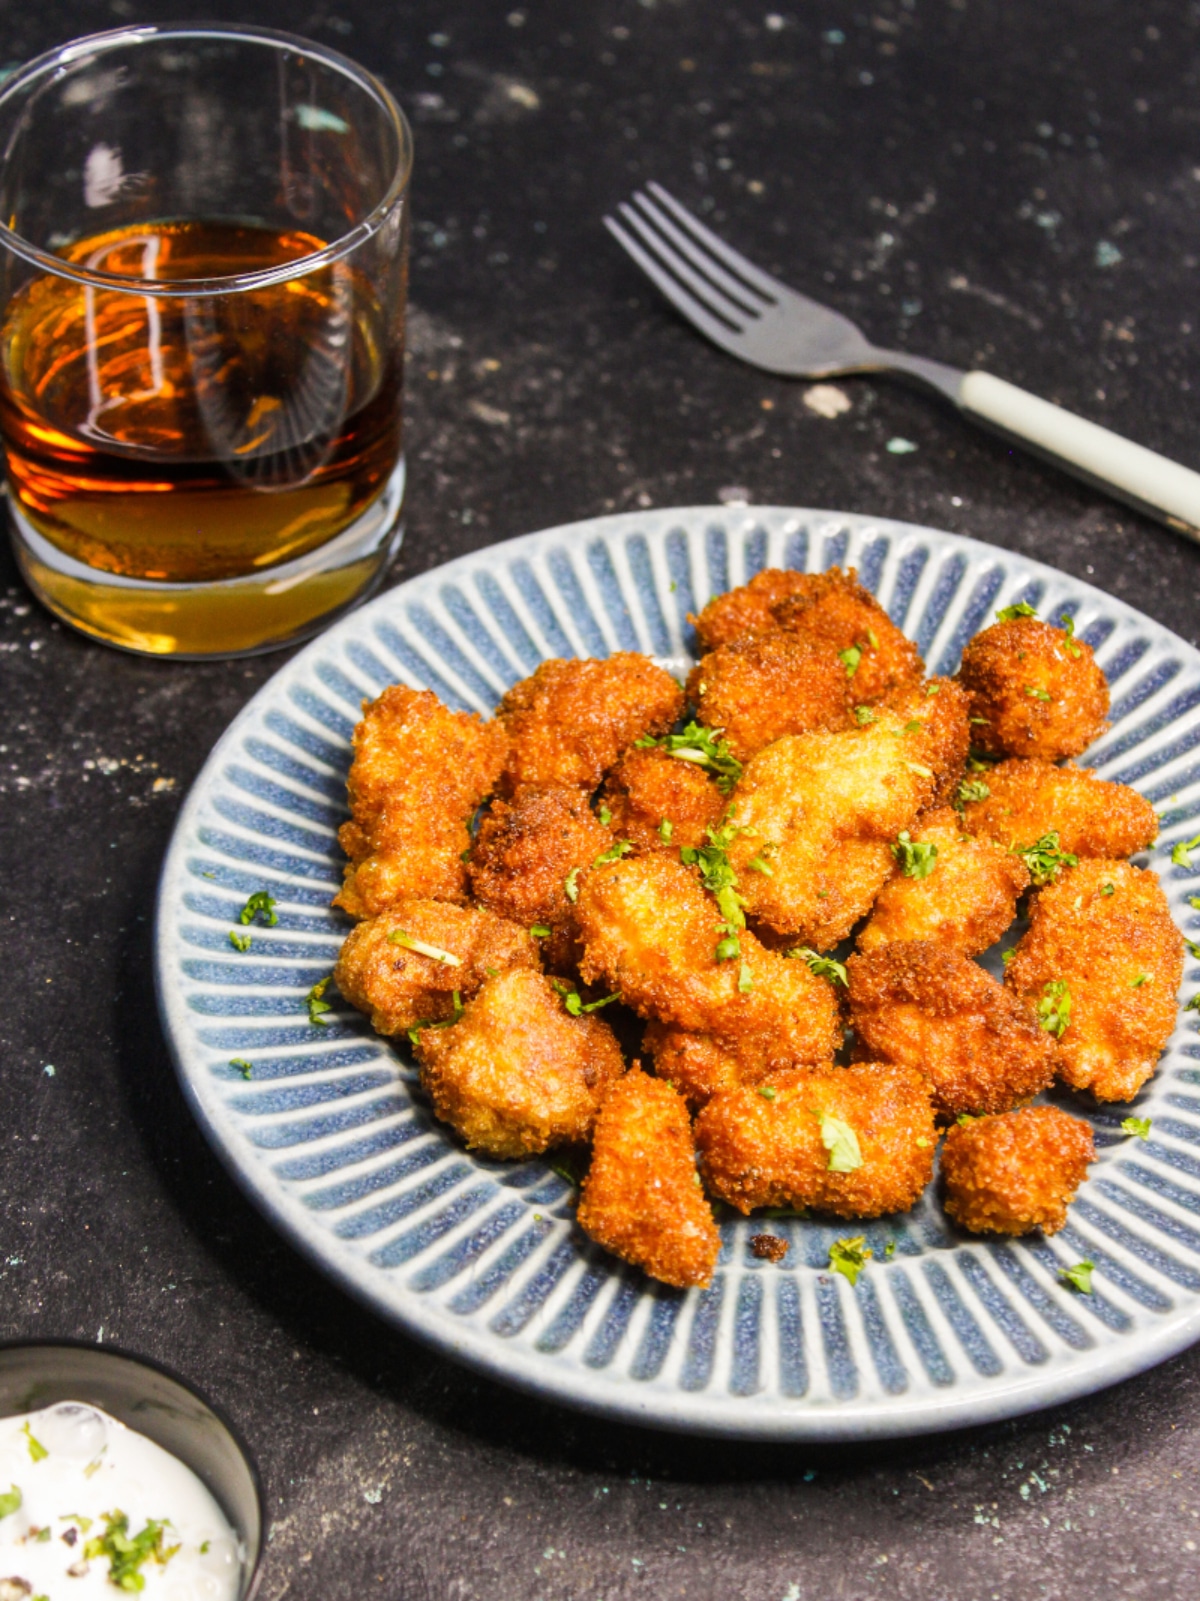 Spicy Chicken Popcorn served on a plate